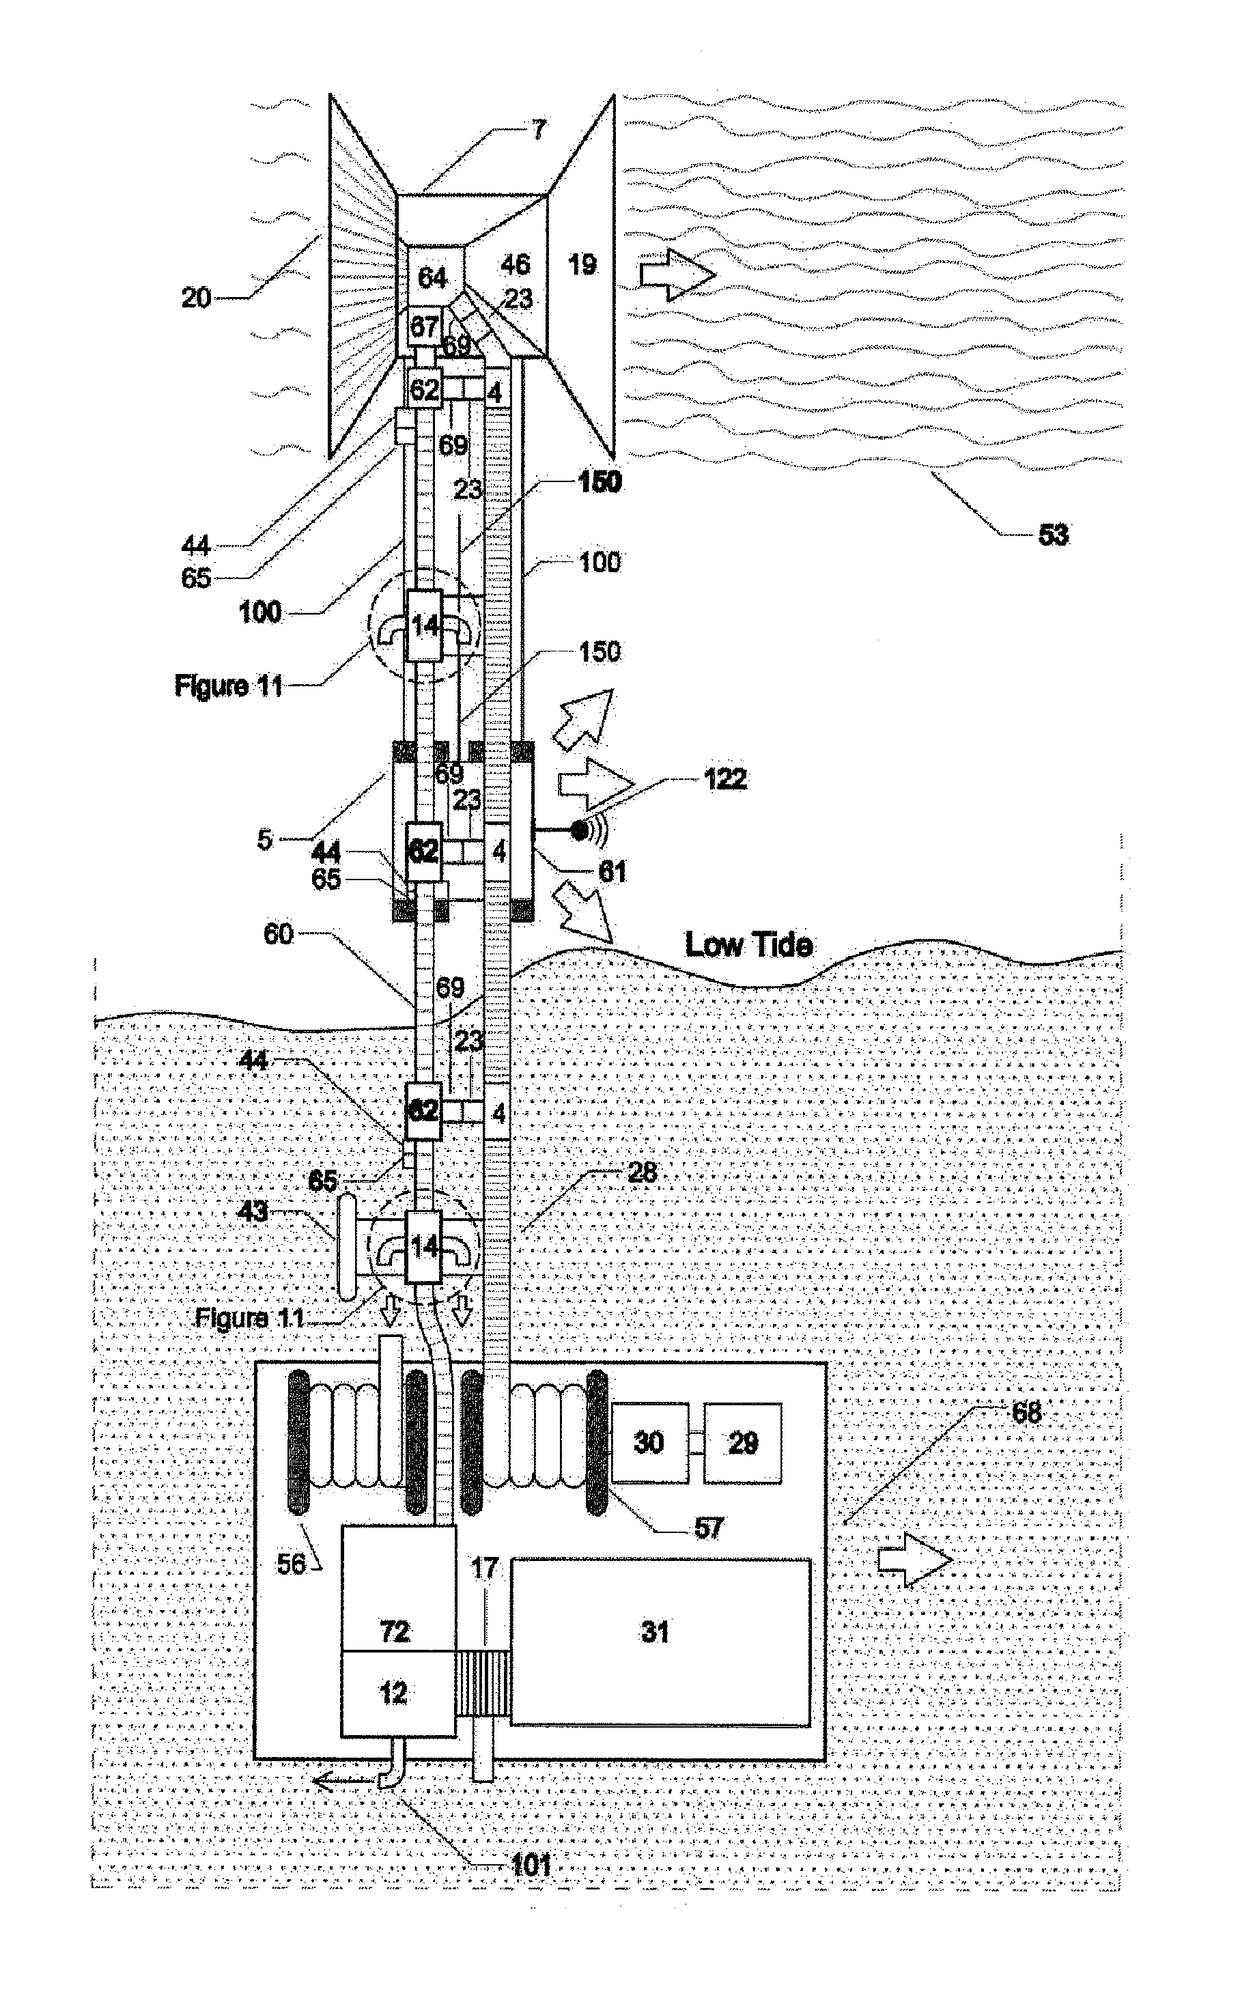 System for harvesting seaweed and generating ethanol therefrom